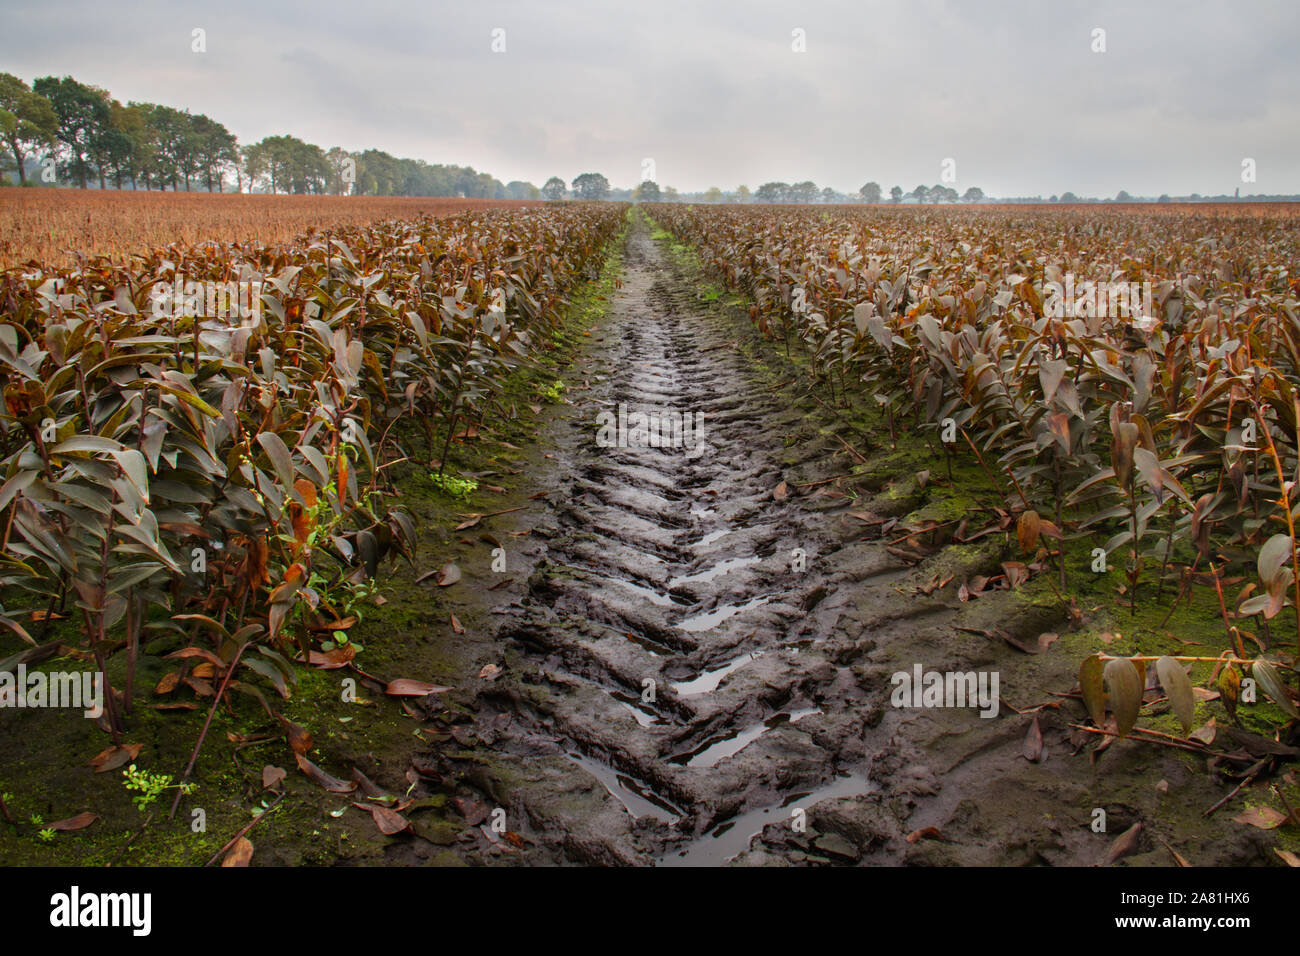 Tire track in a field with withered Lilies in autumn Stock Photo